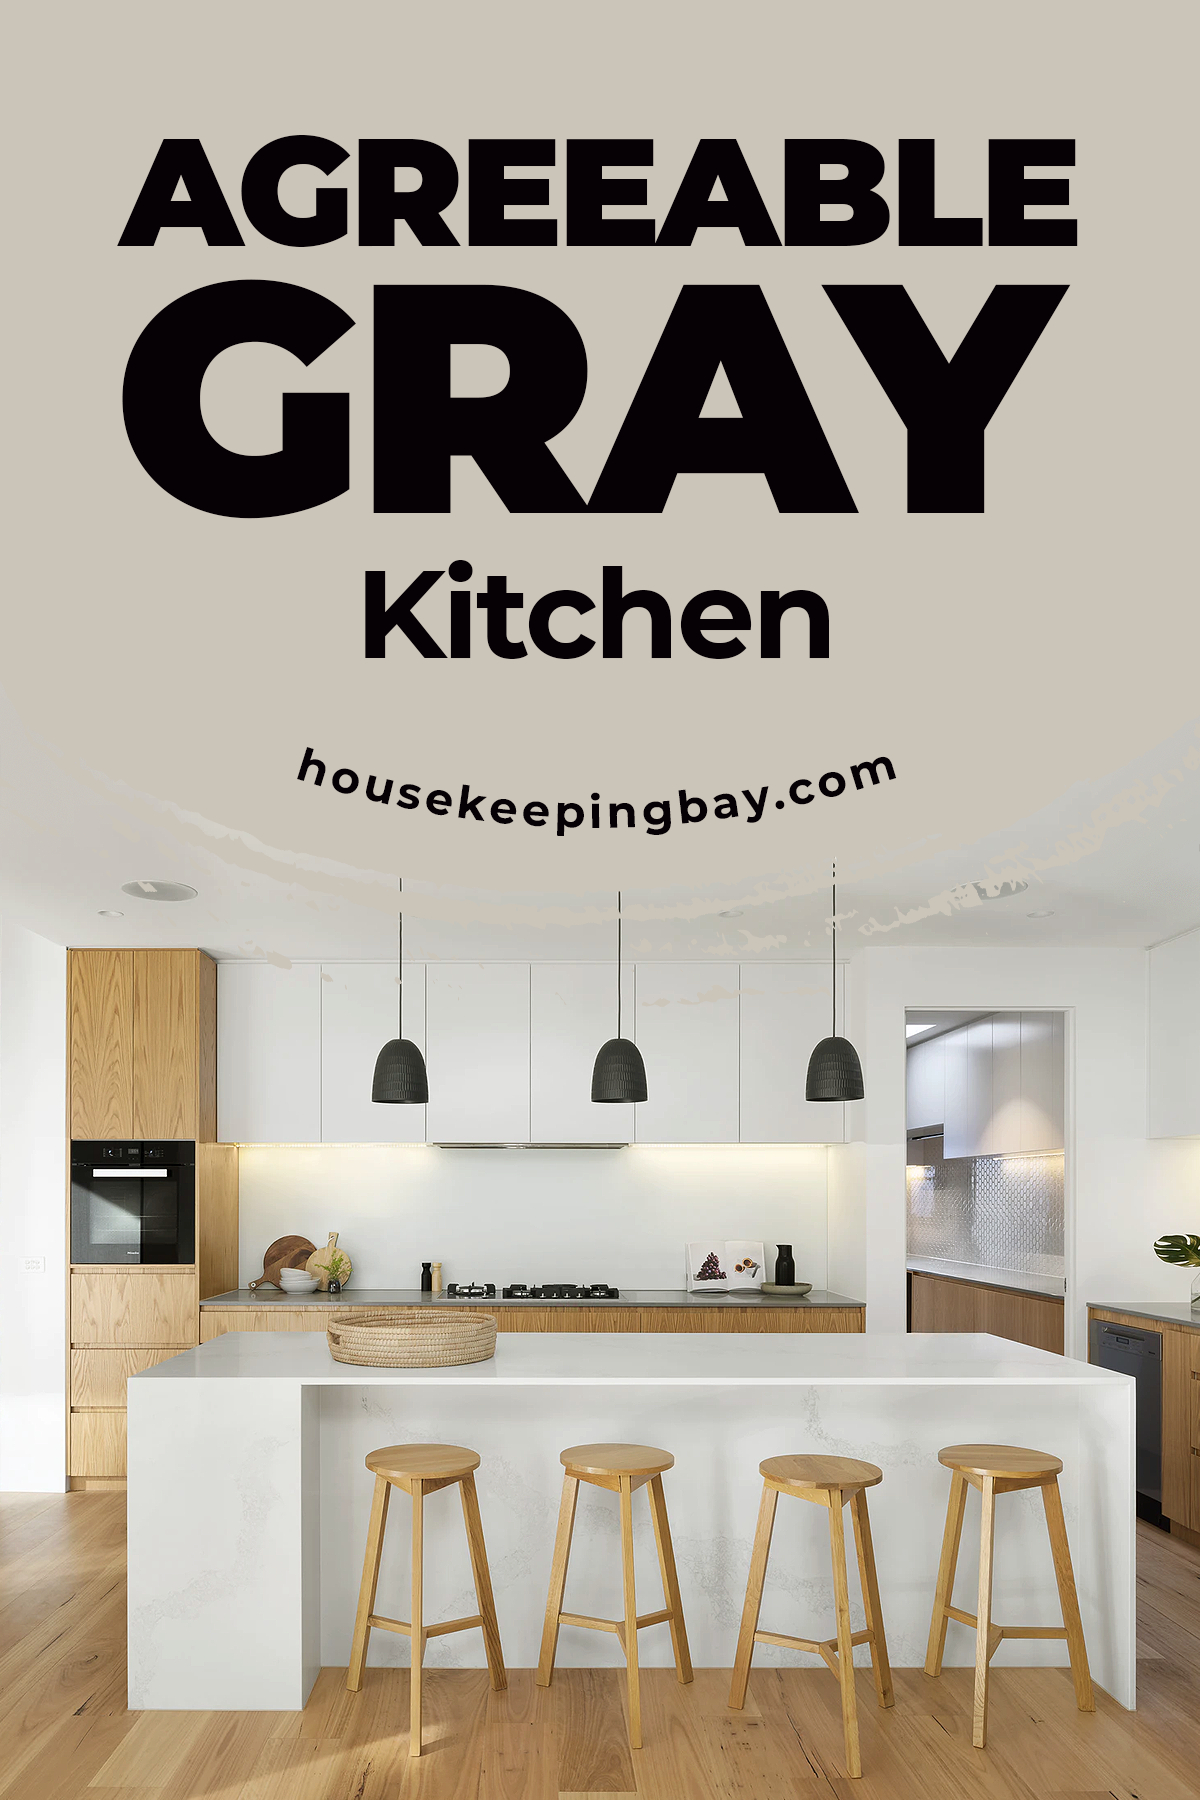 Agreeable gray kitchen